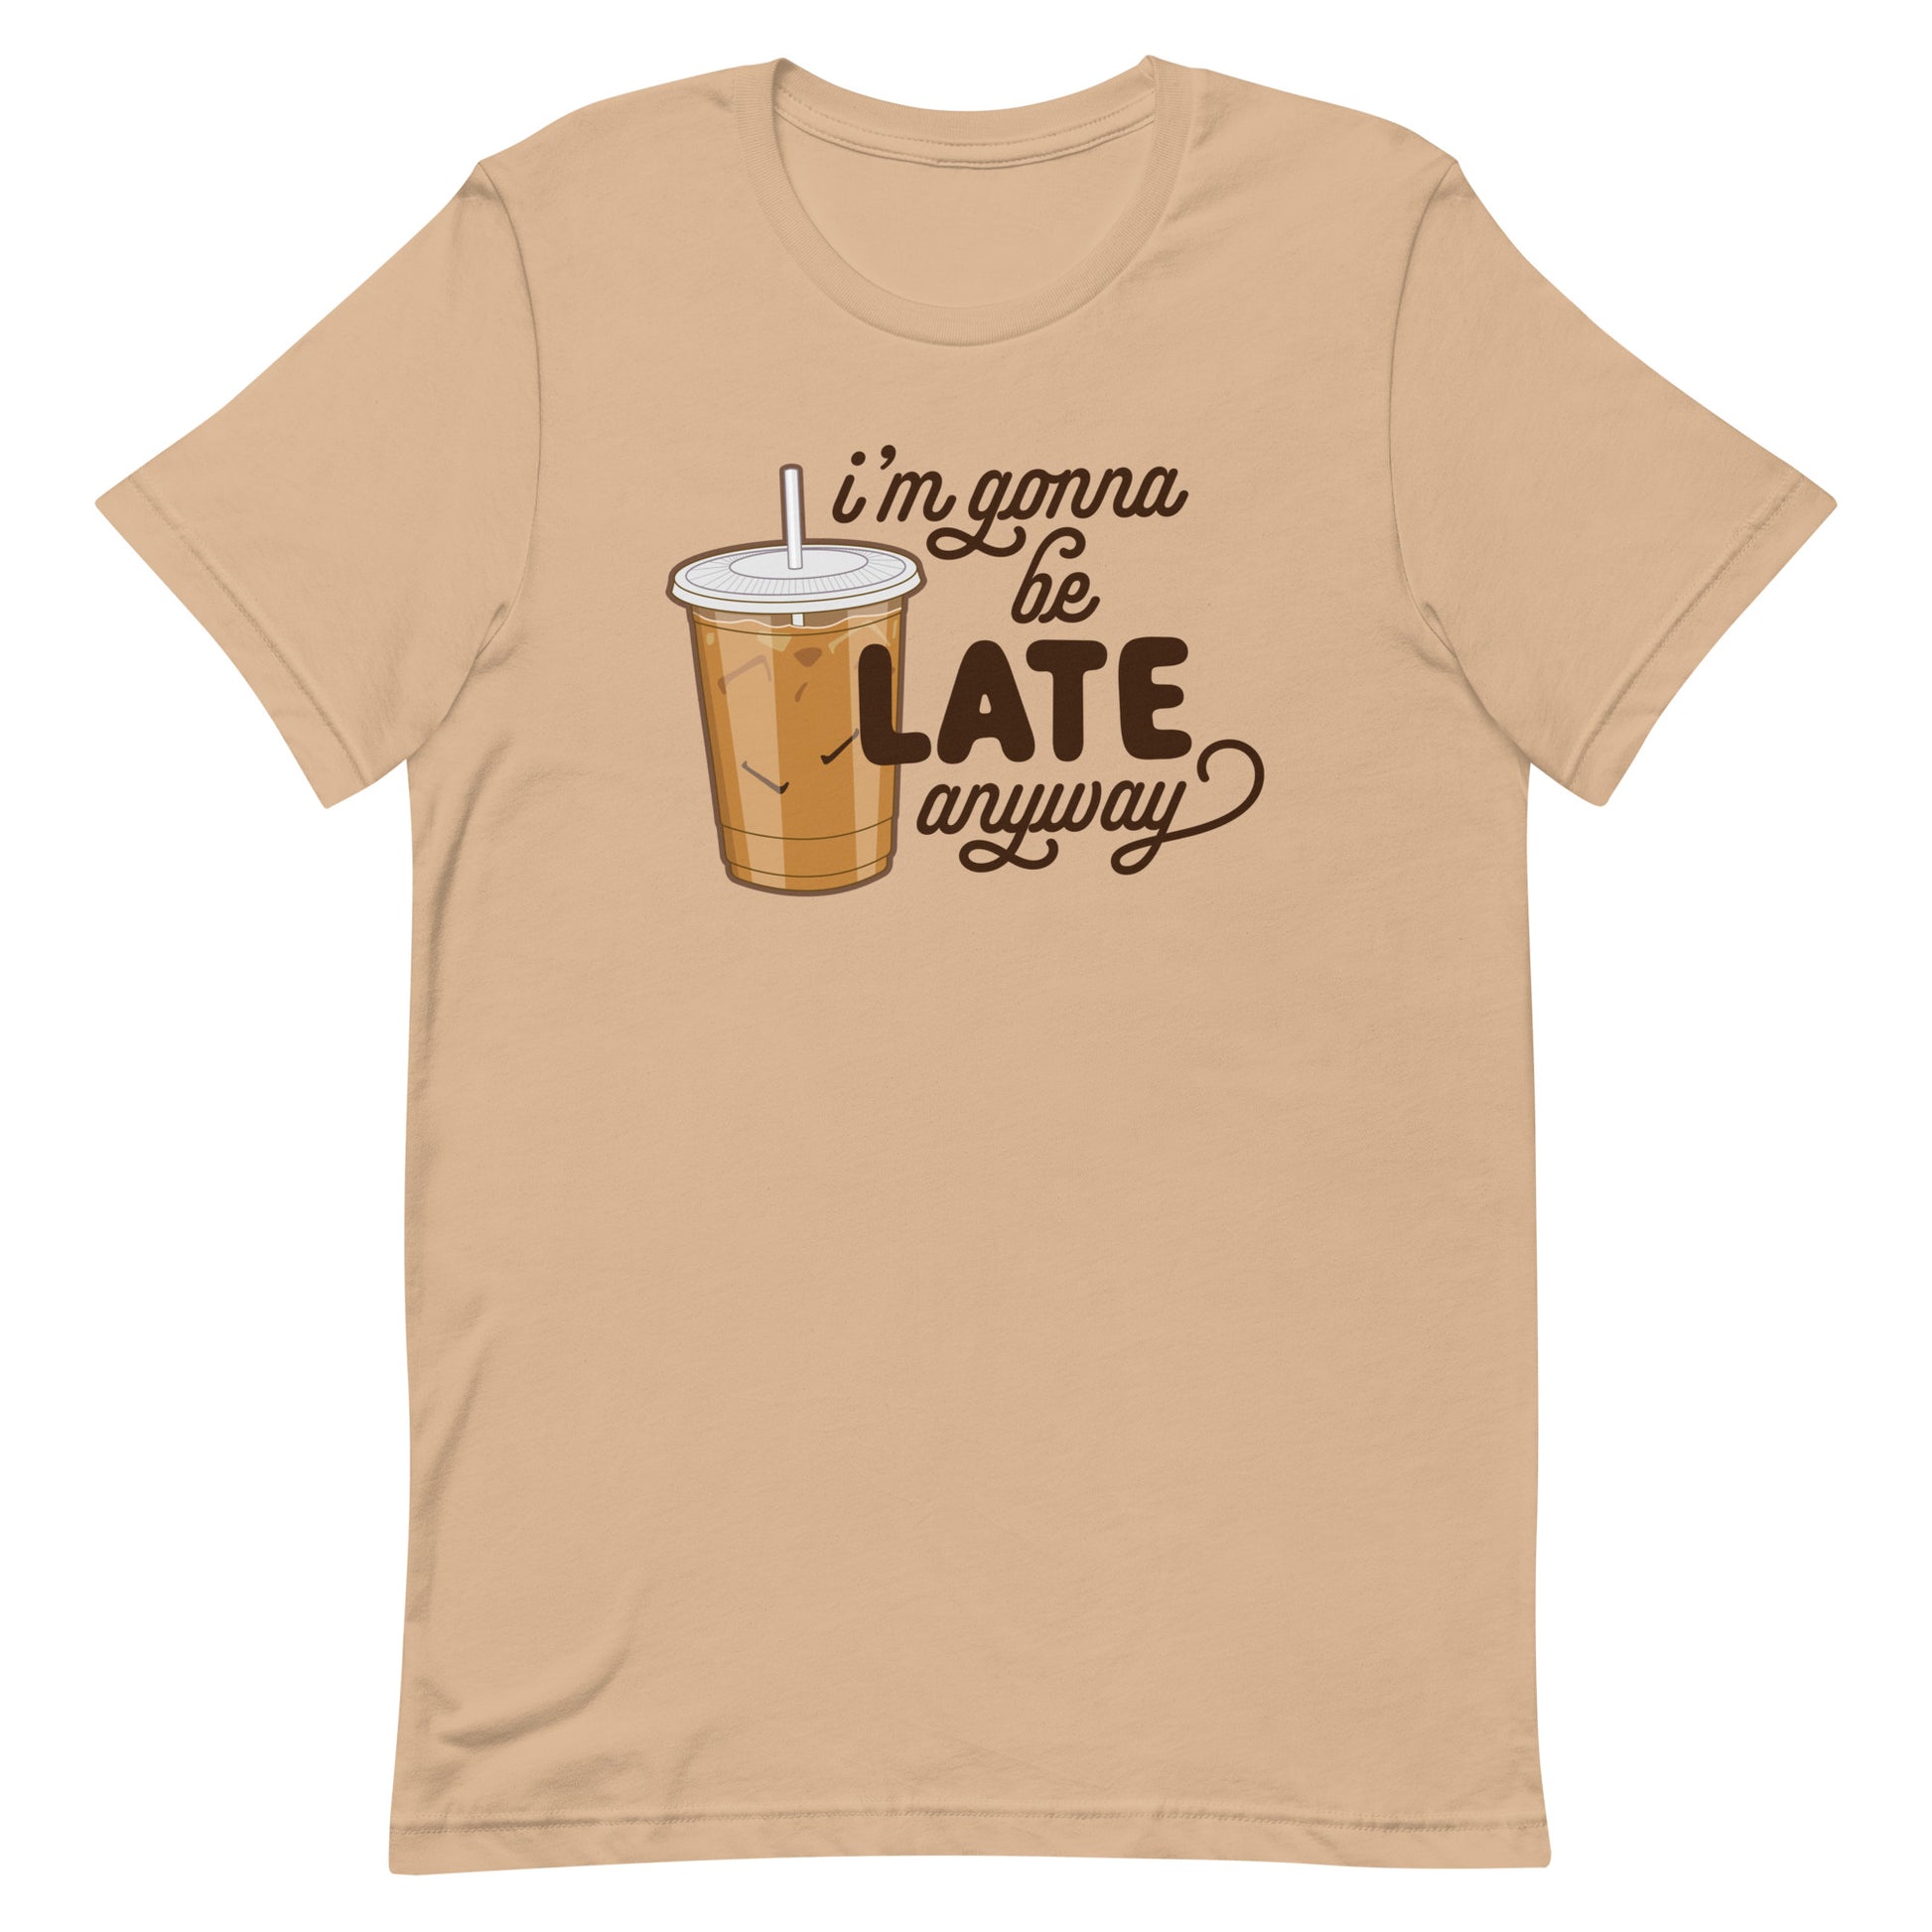 A tan crewneck t-shirt featuring an illustration of iced coffee. Text next to the coffee reads "I'm gonna be LATE anyway".